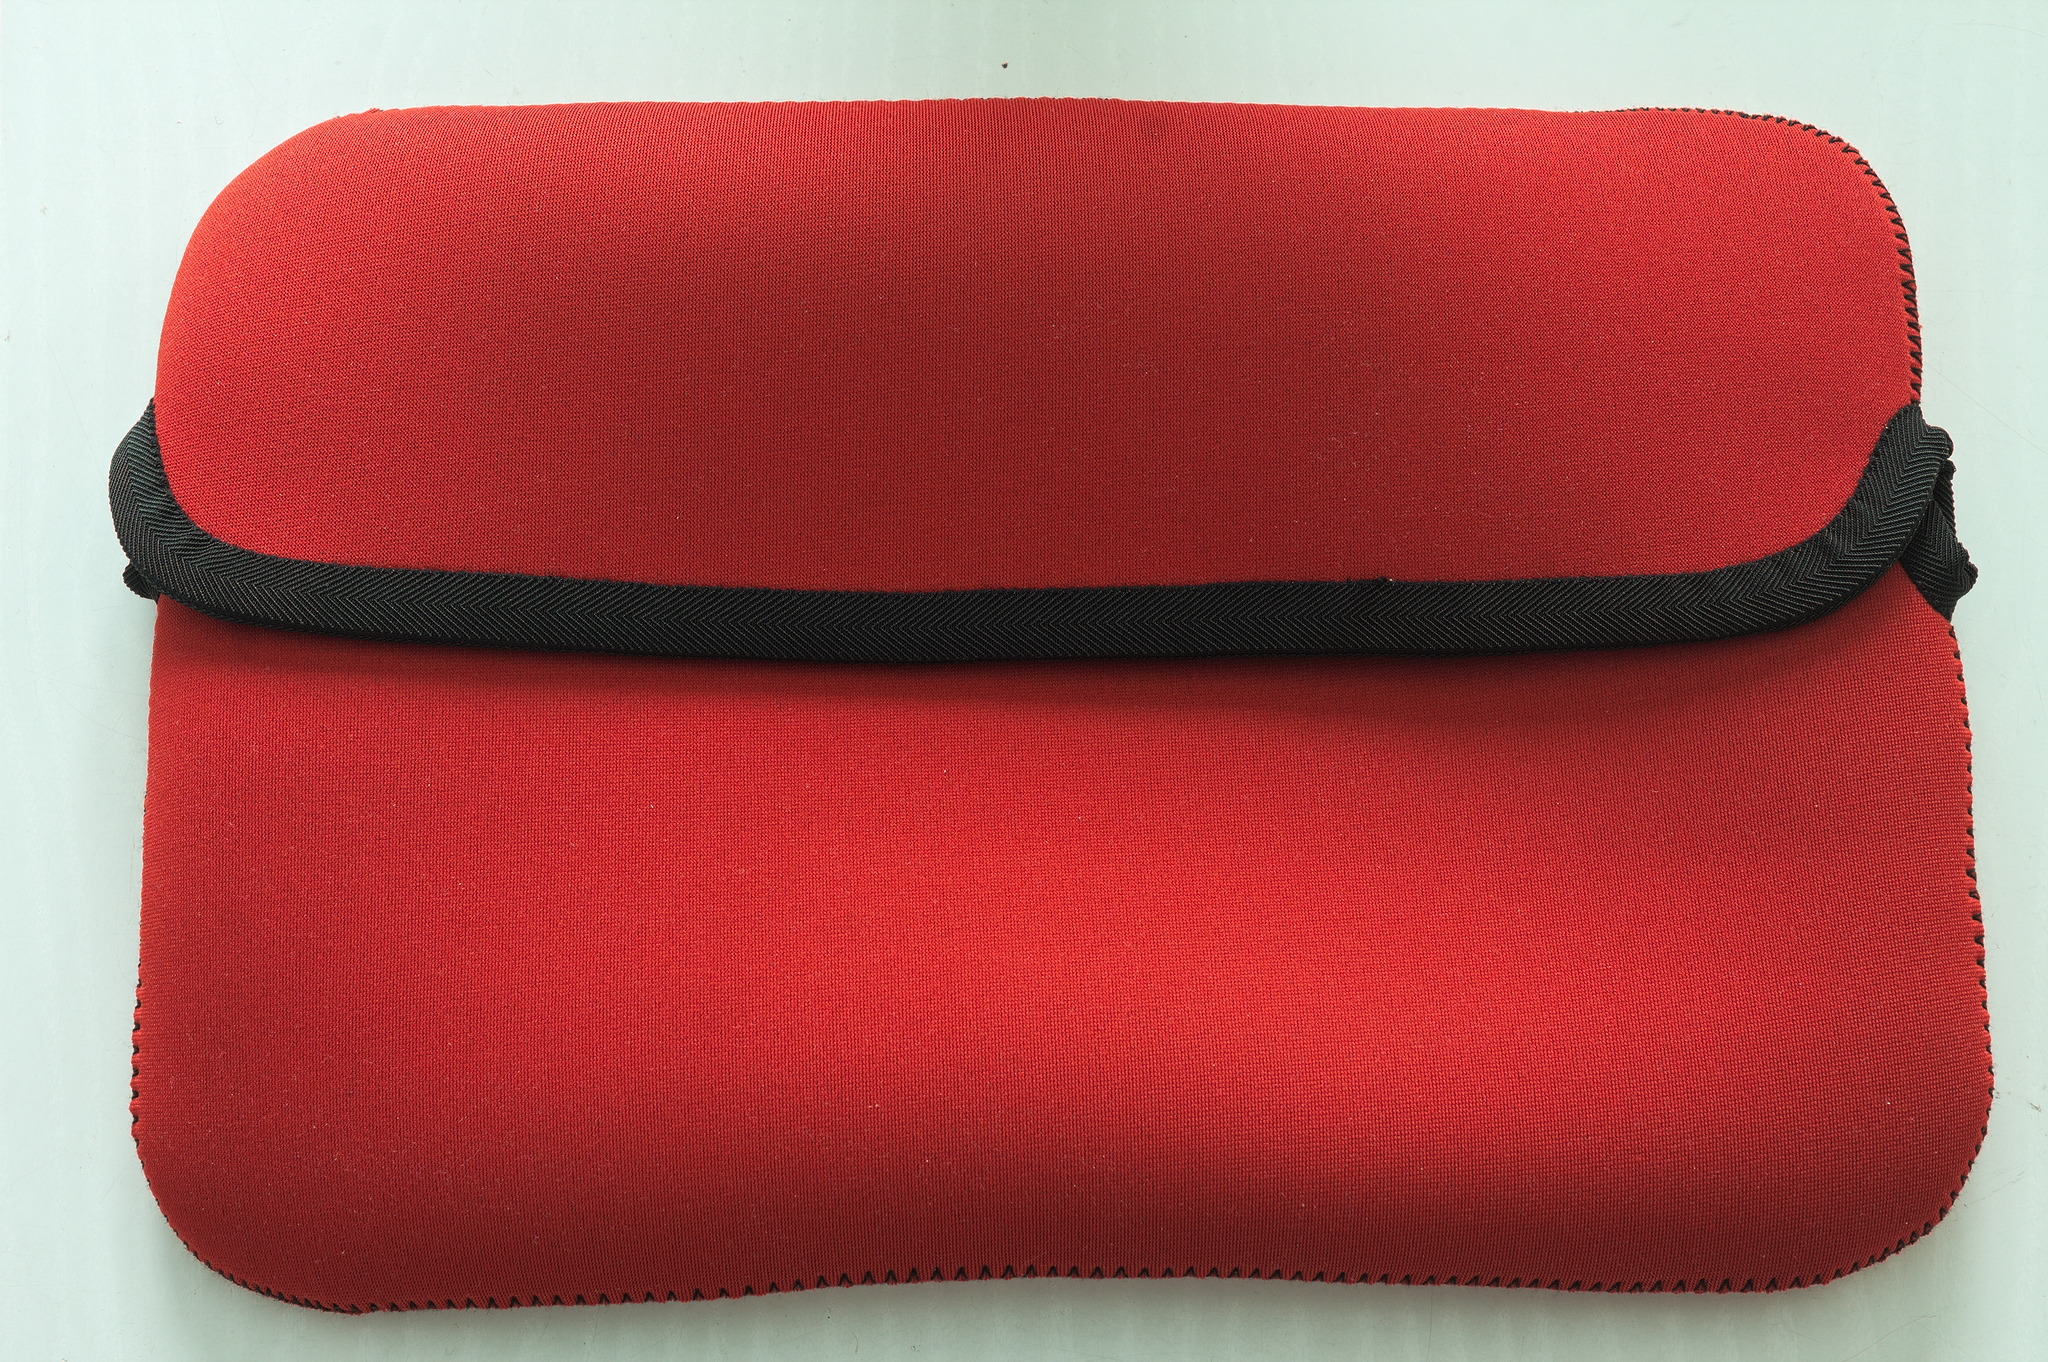 Picture of a red neoprene laptop sleeve, with rounder corners and currently empty.